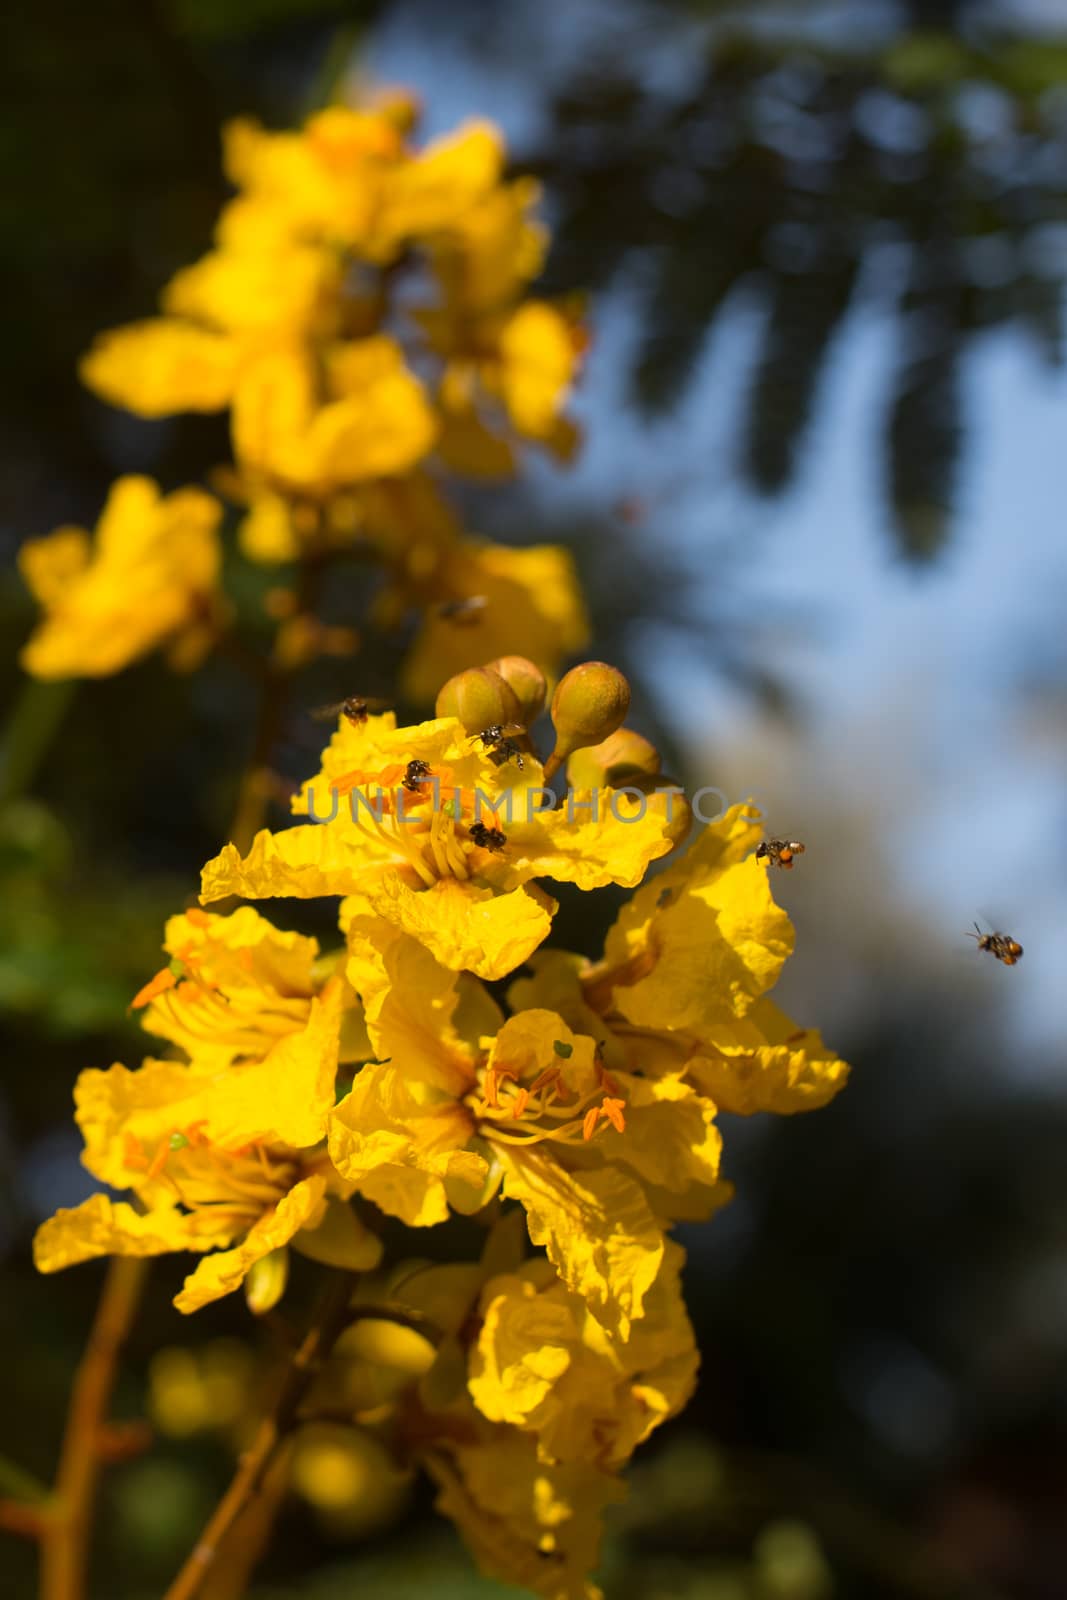 Yellow Flower with flying bees by ngarare